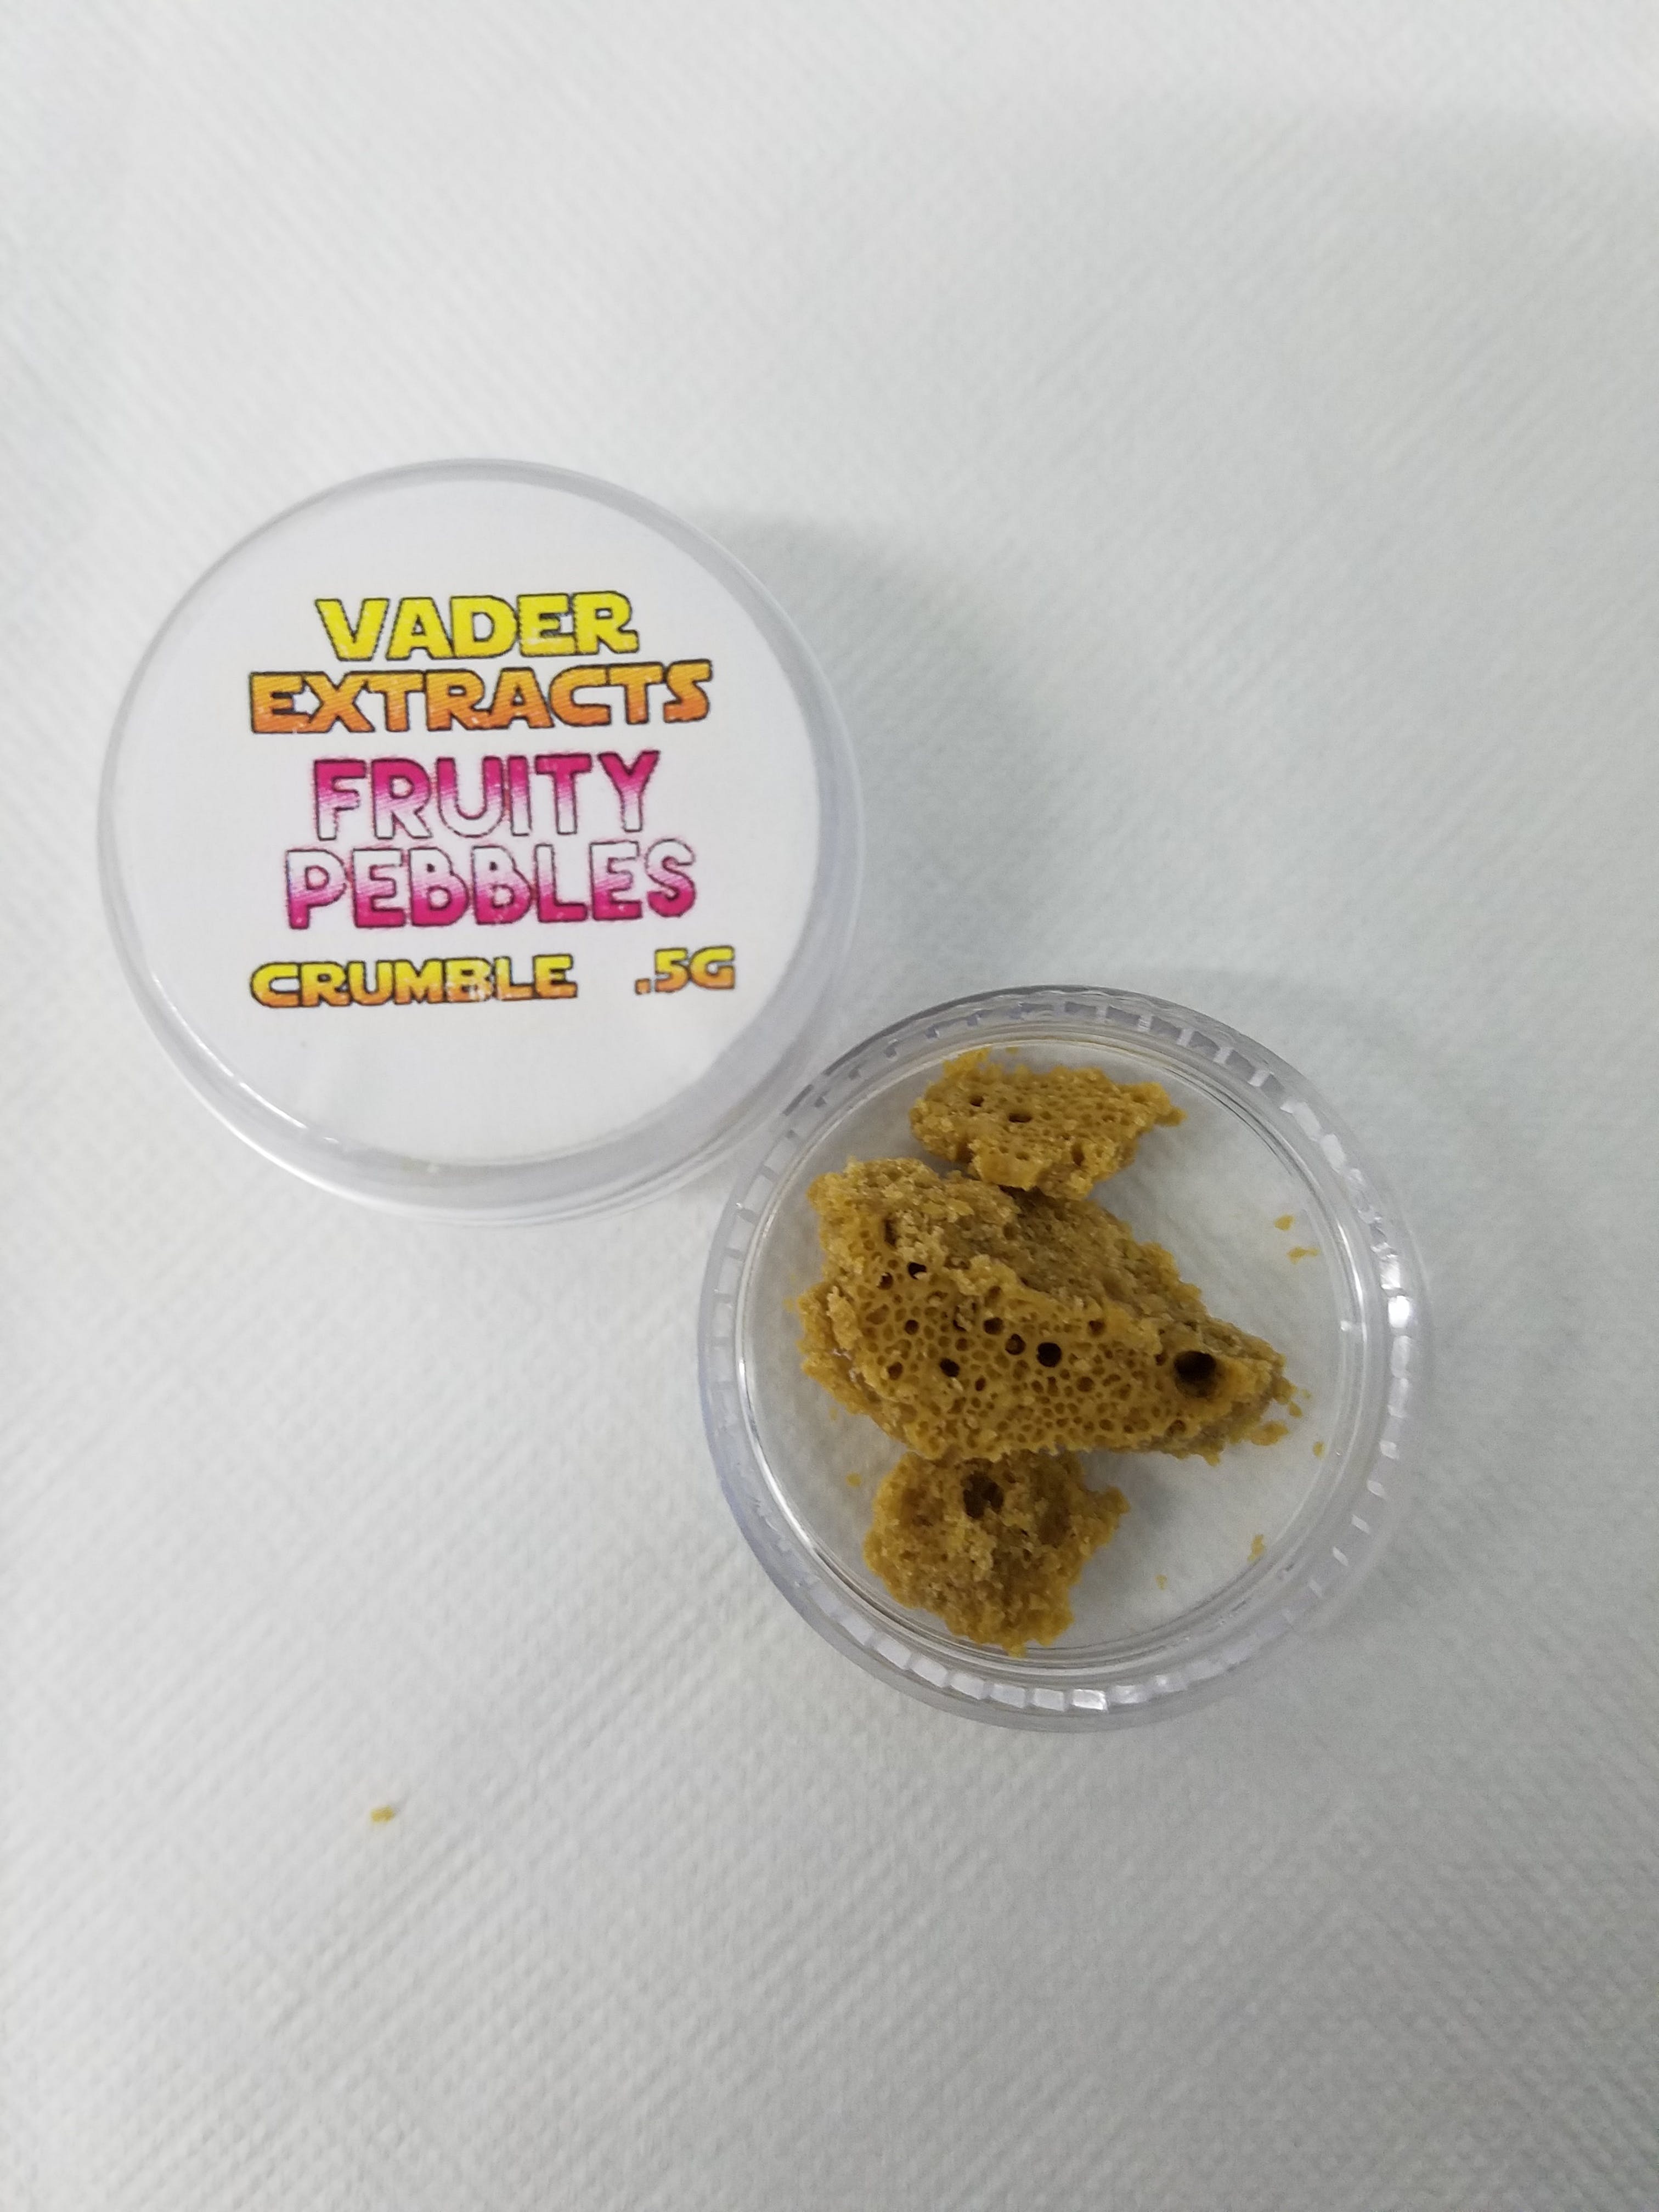 wax-vader-extracts-trim-run-fruity-pebbles